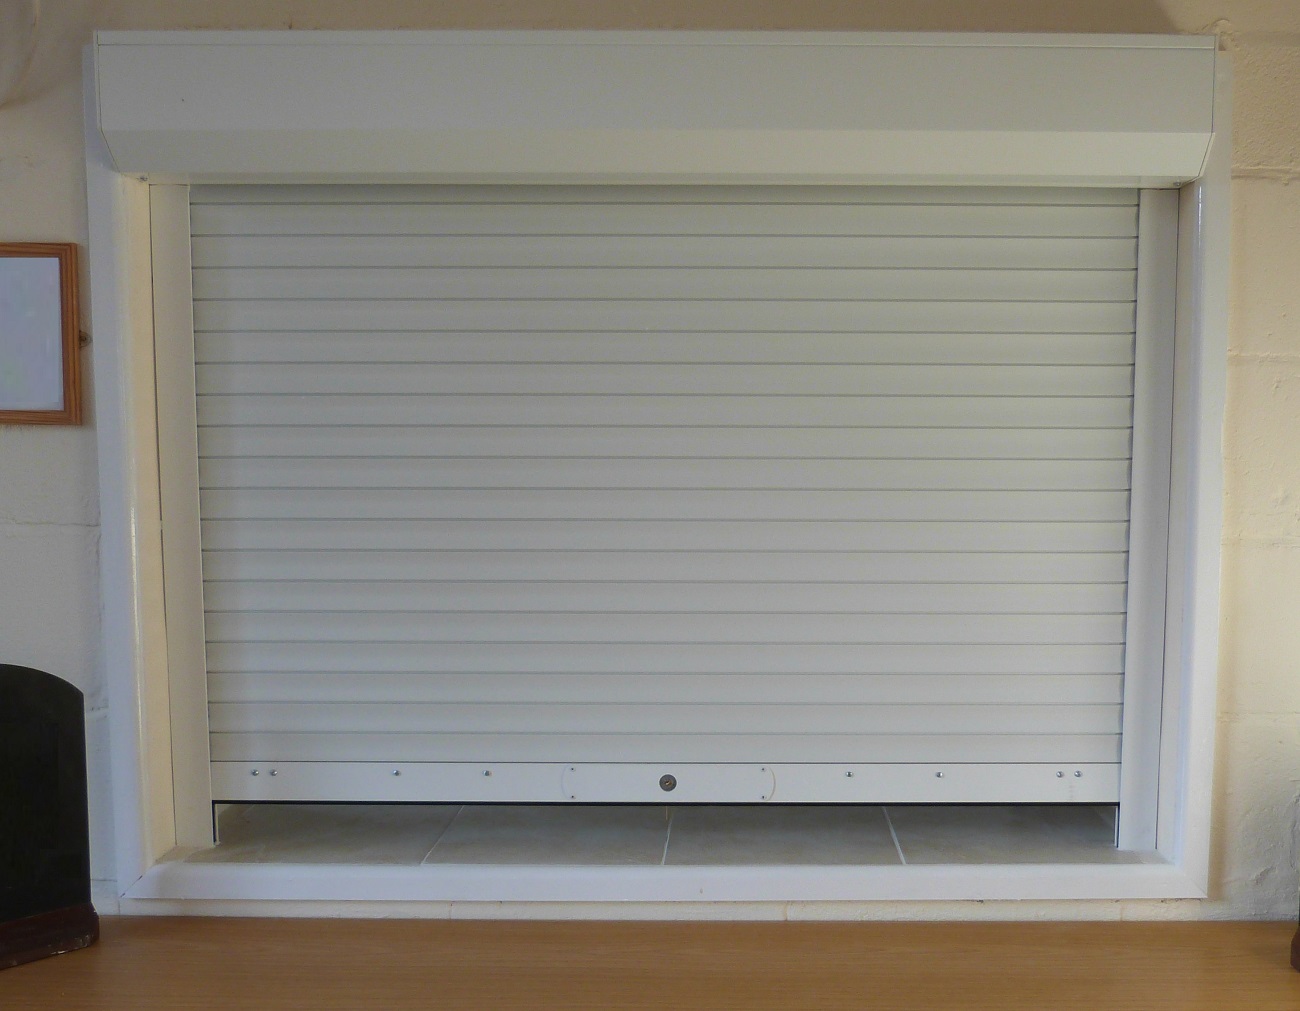 Seceuroshield 38 extruded aluminium roller shutter installed within a kitchen serving hatch in village hall located in Surrey.